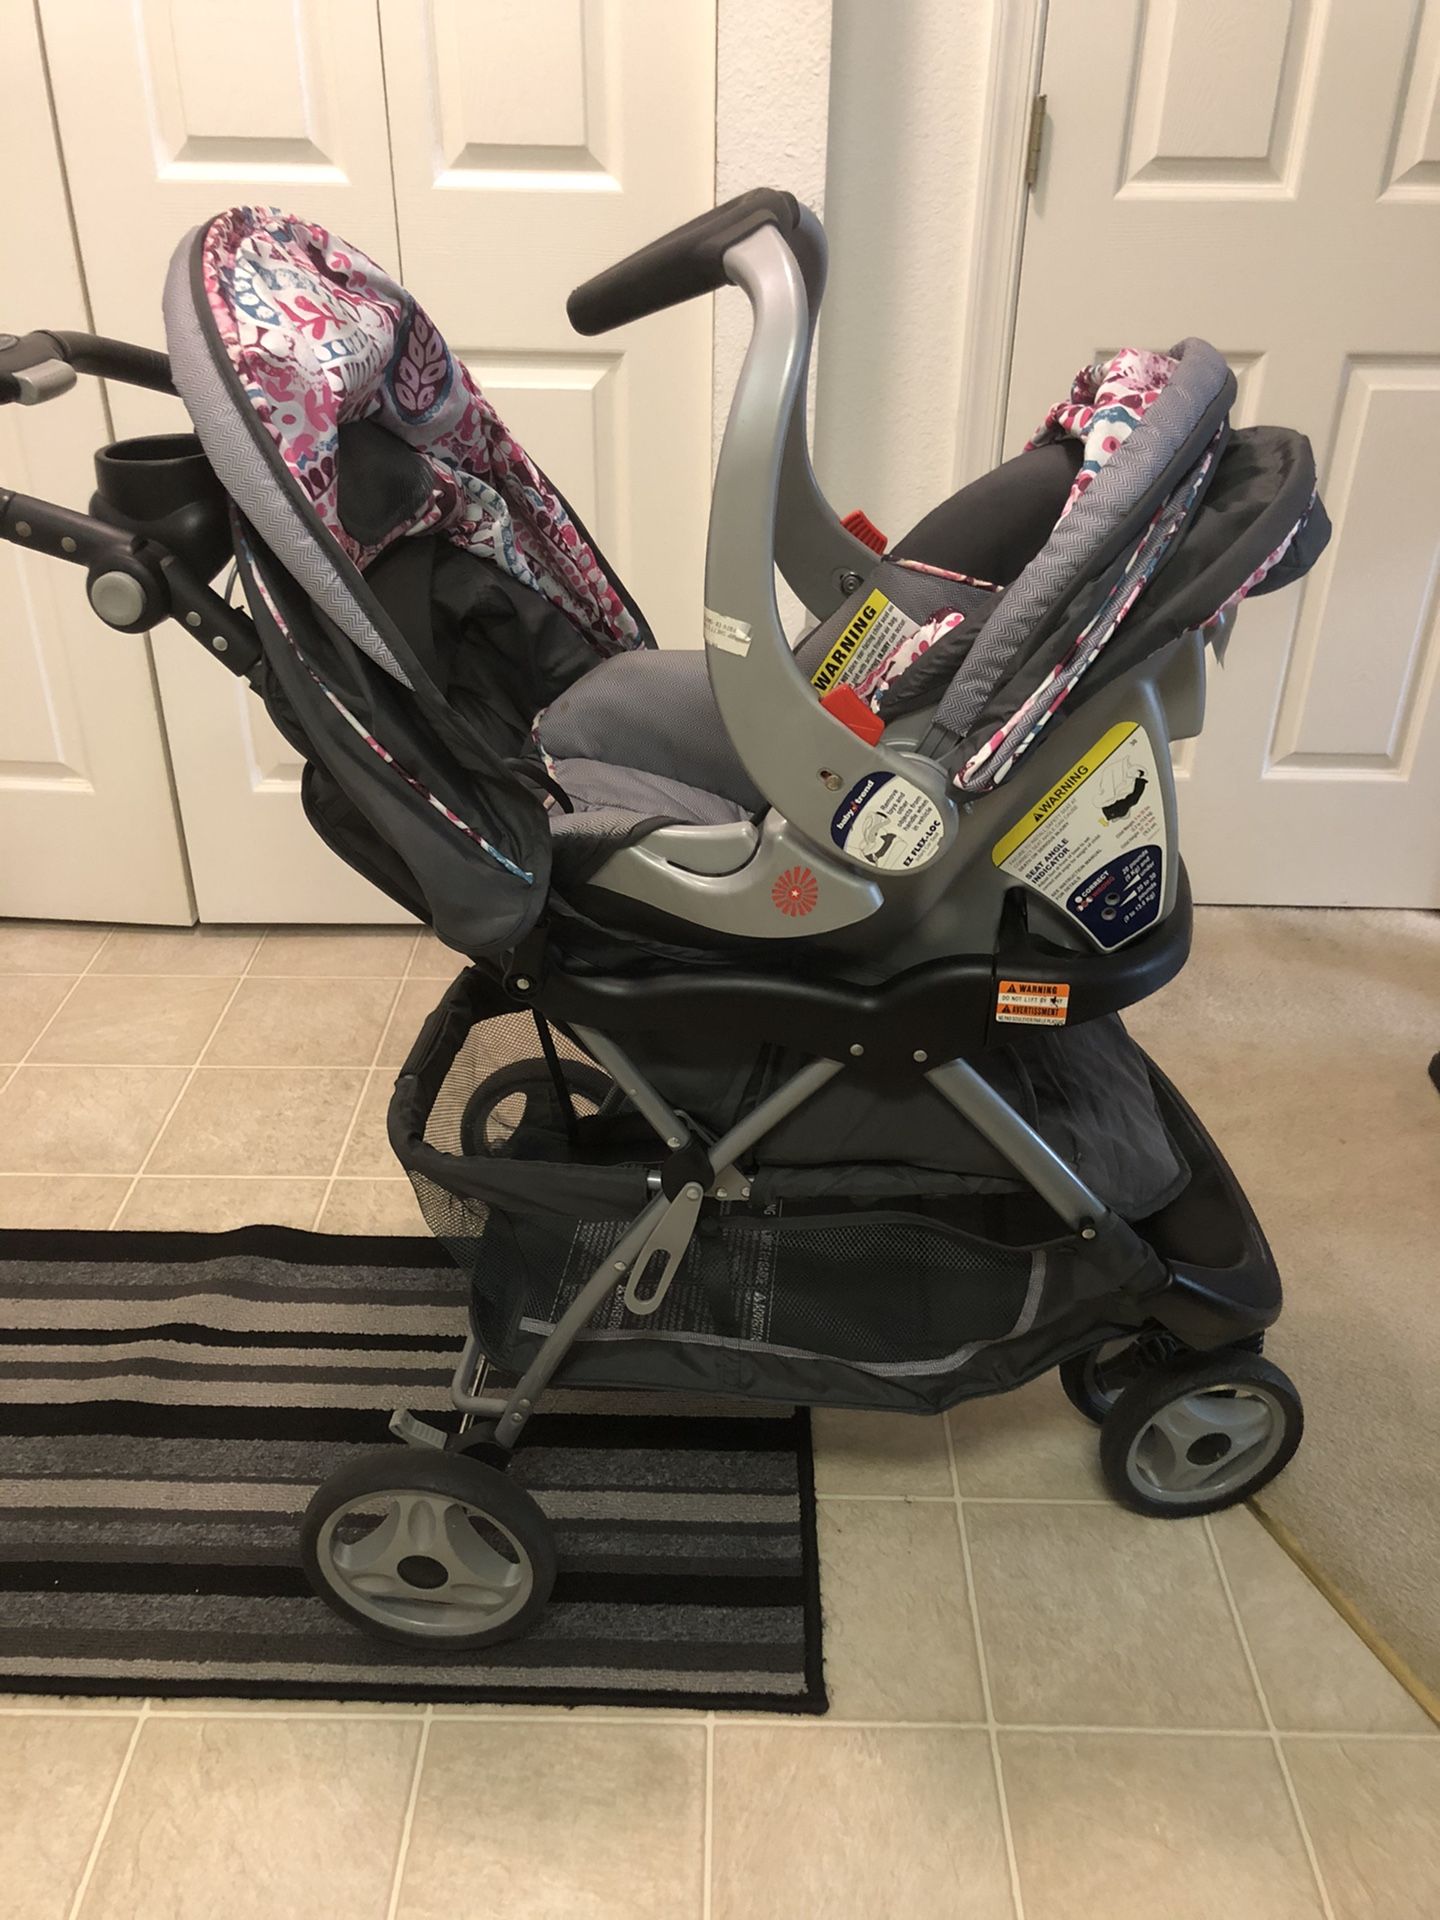 Baby Trend stroller and car seat